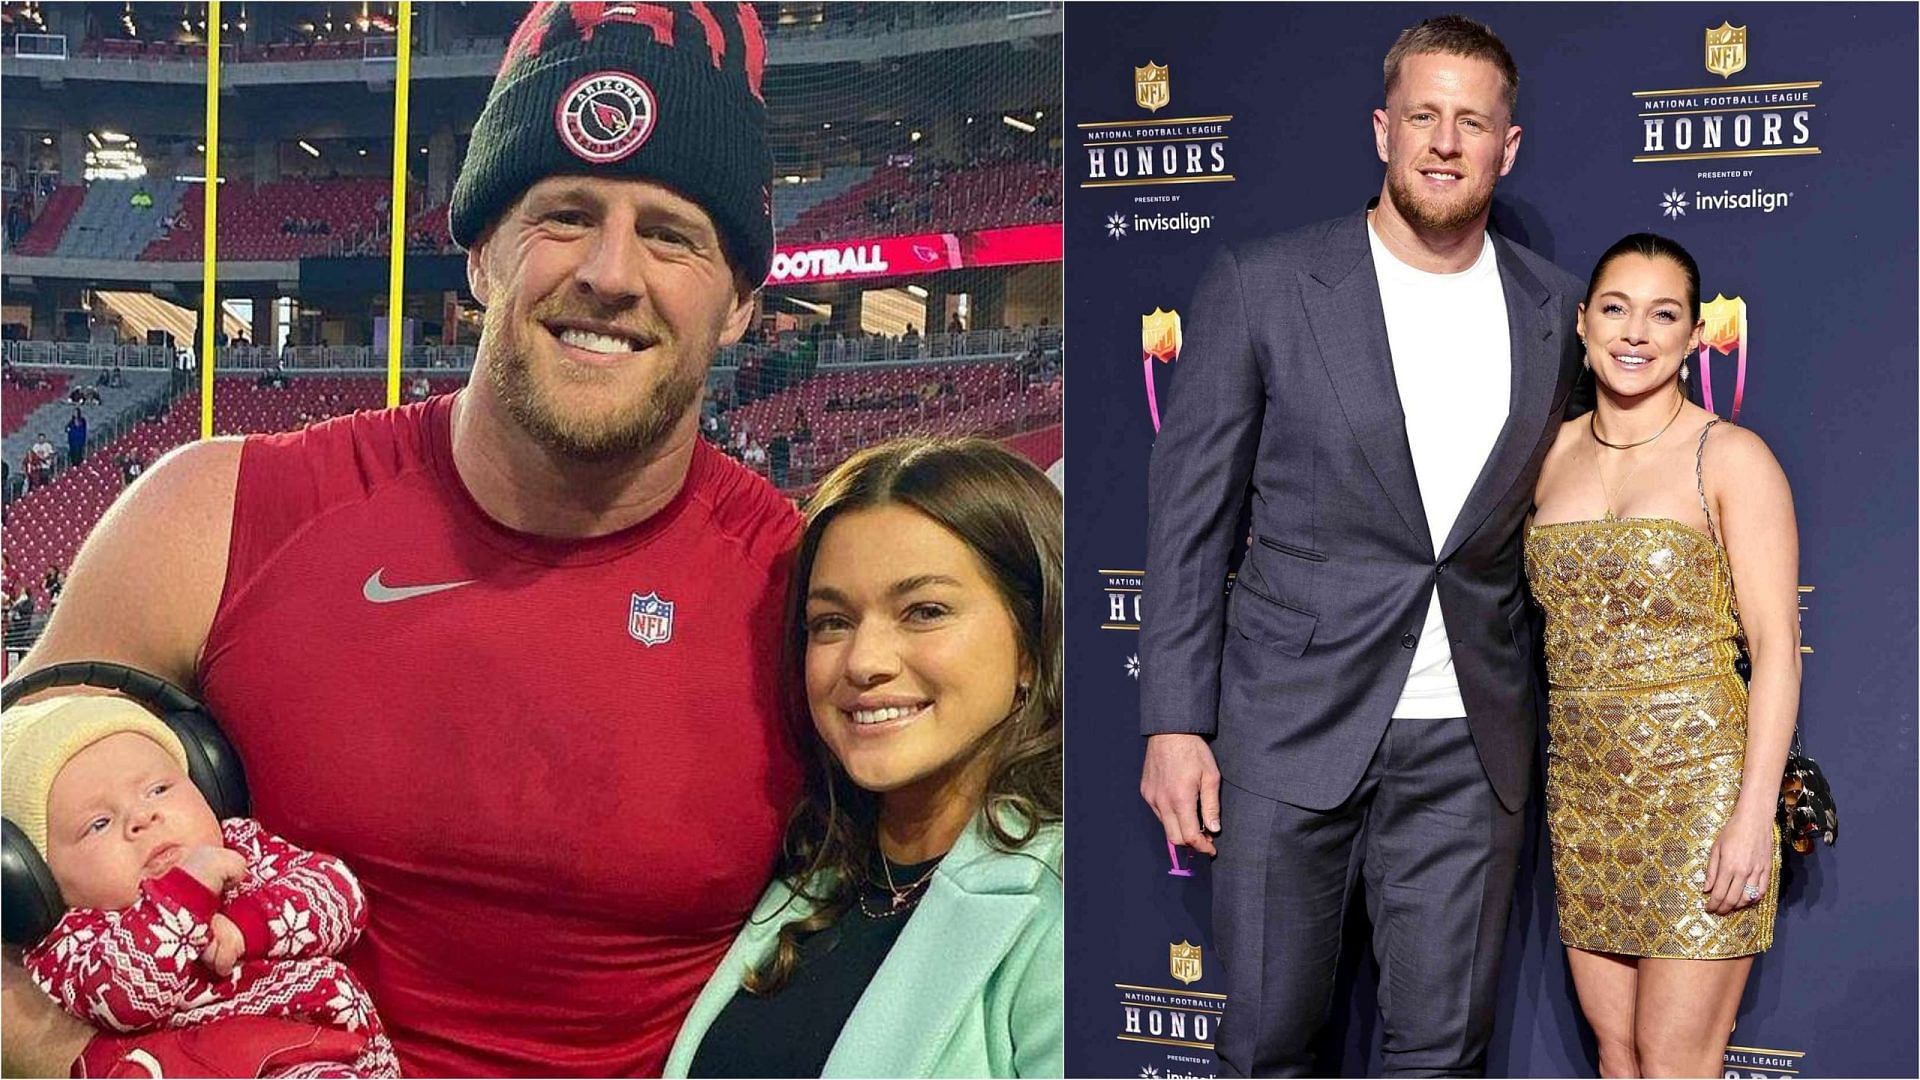 JJ Watt with his Wife and children, and family